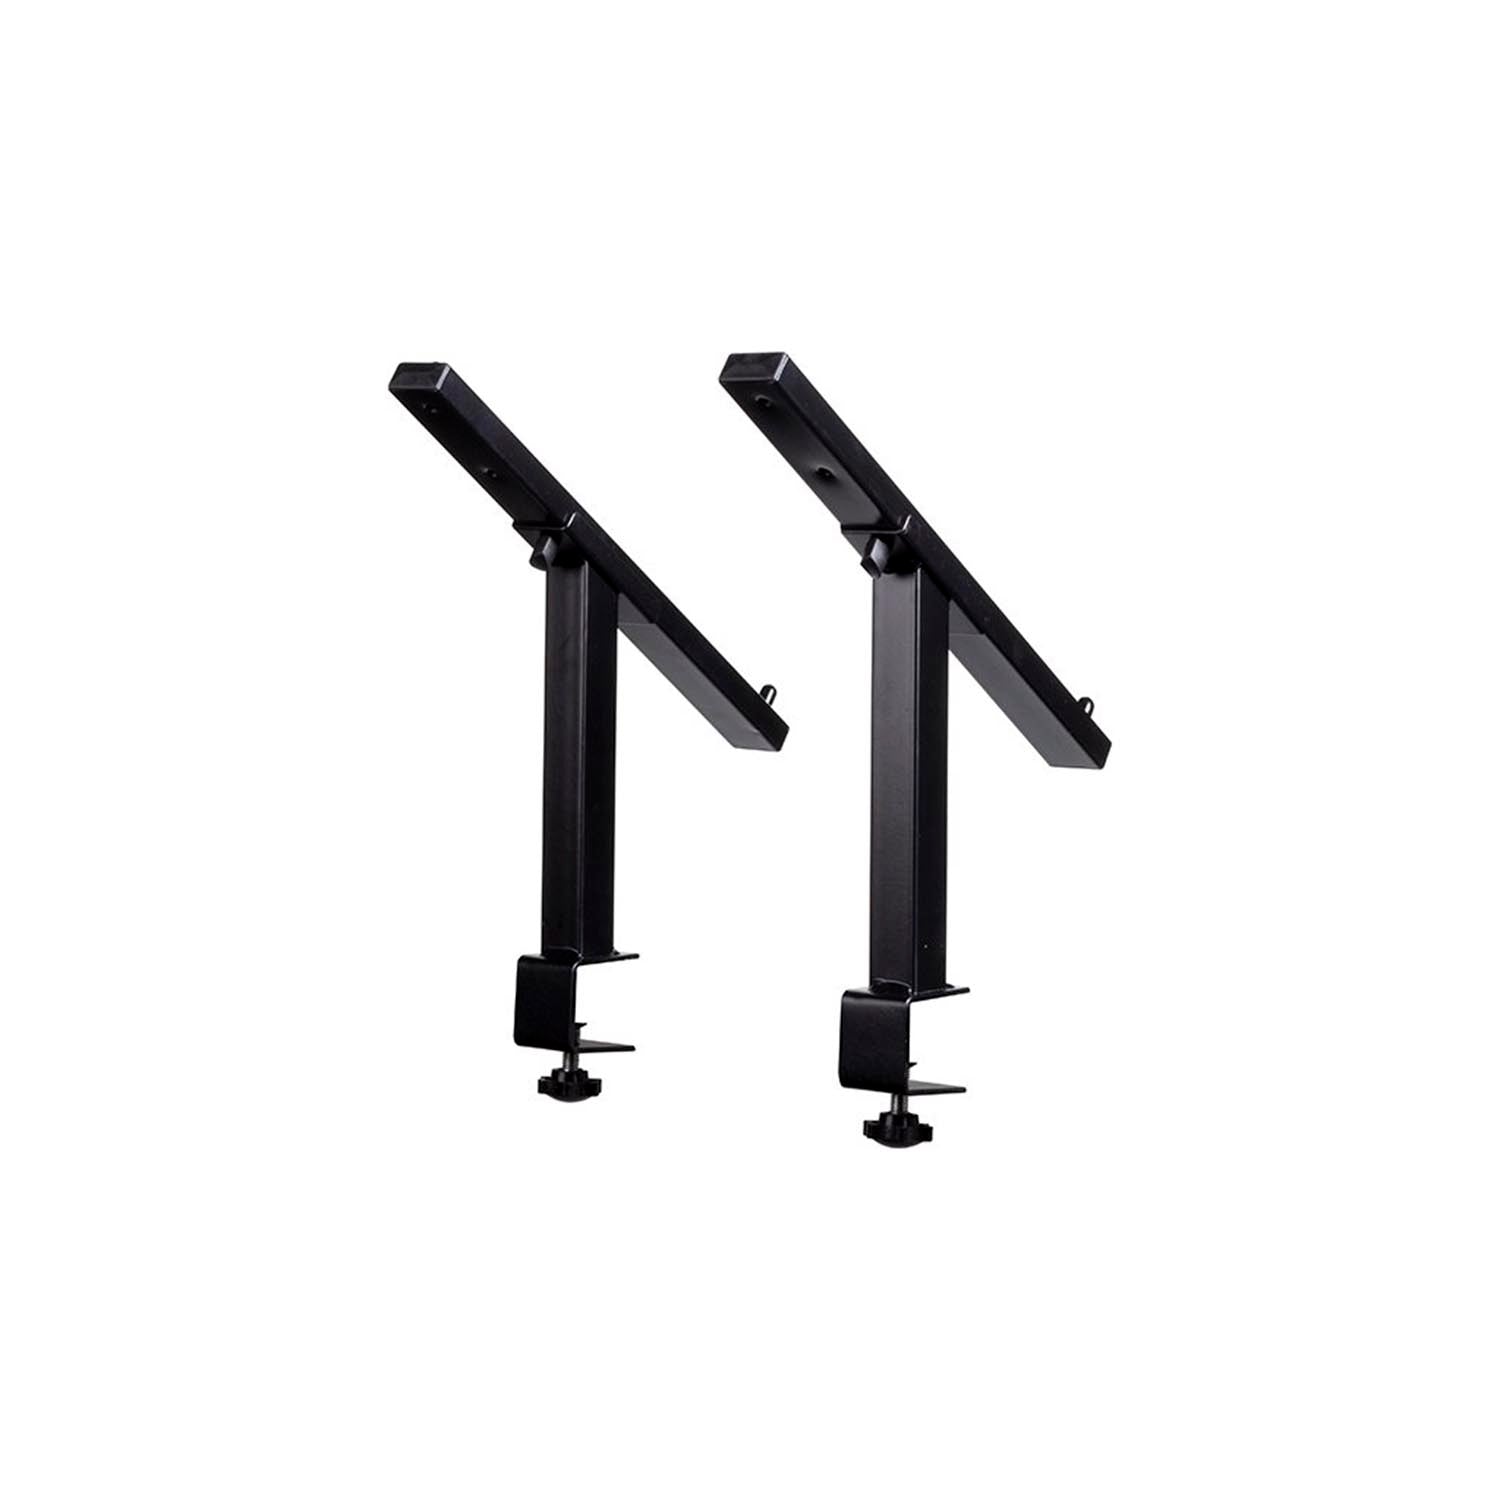 C-Stock: Headliner HL20002 La Brea Laptop Stand Brackets, Pair of Mounting Brackets with Table Clamps - Hollywood DJ